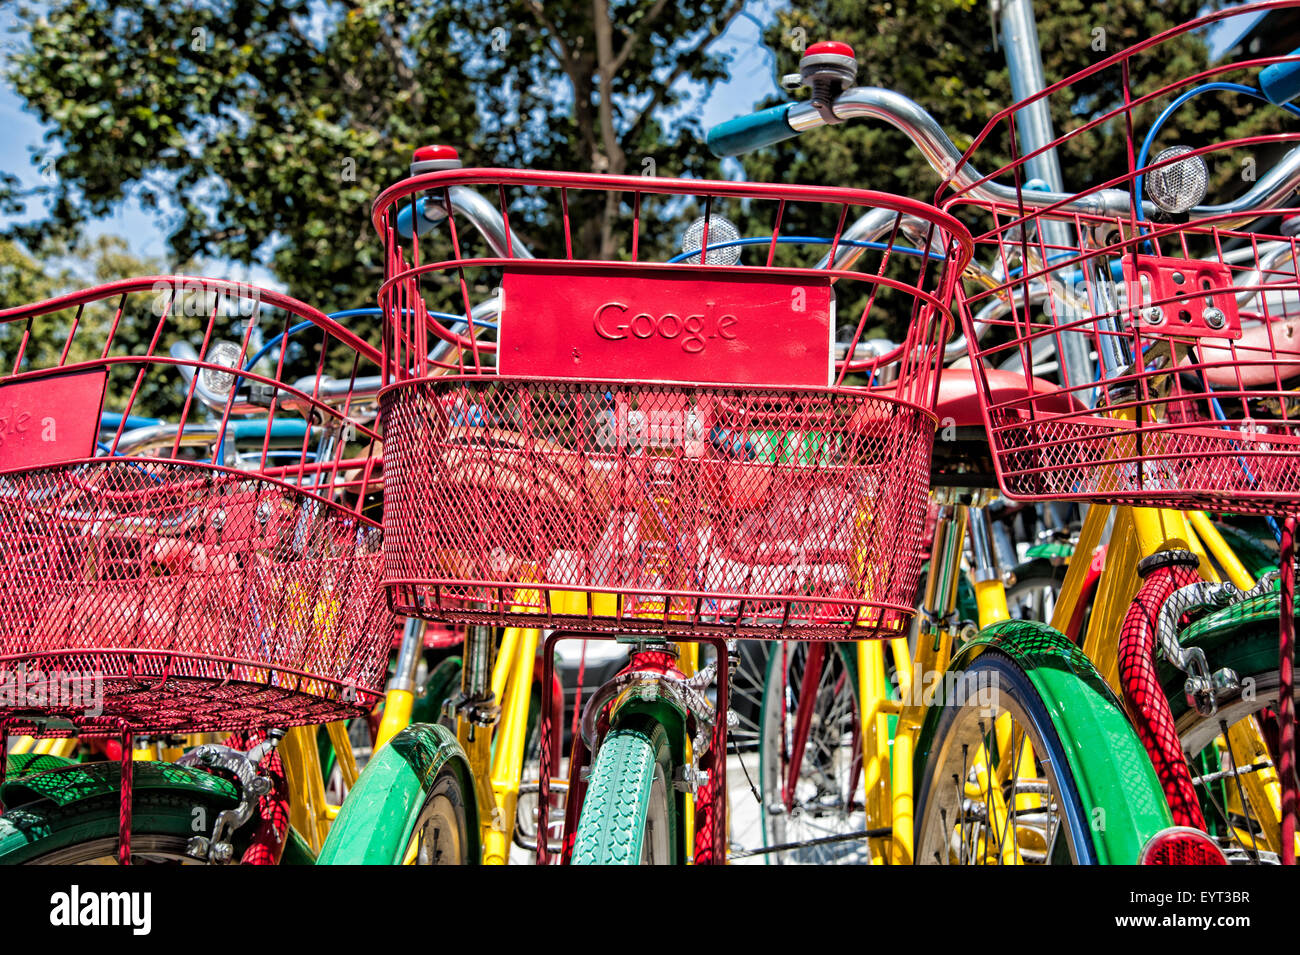 MOUNTAIN VIEW, CA - AUGUST 1, 2015: Bikes used by Google employees to navigate Google headquarters, also known as Googleplex, in Stock Photo